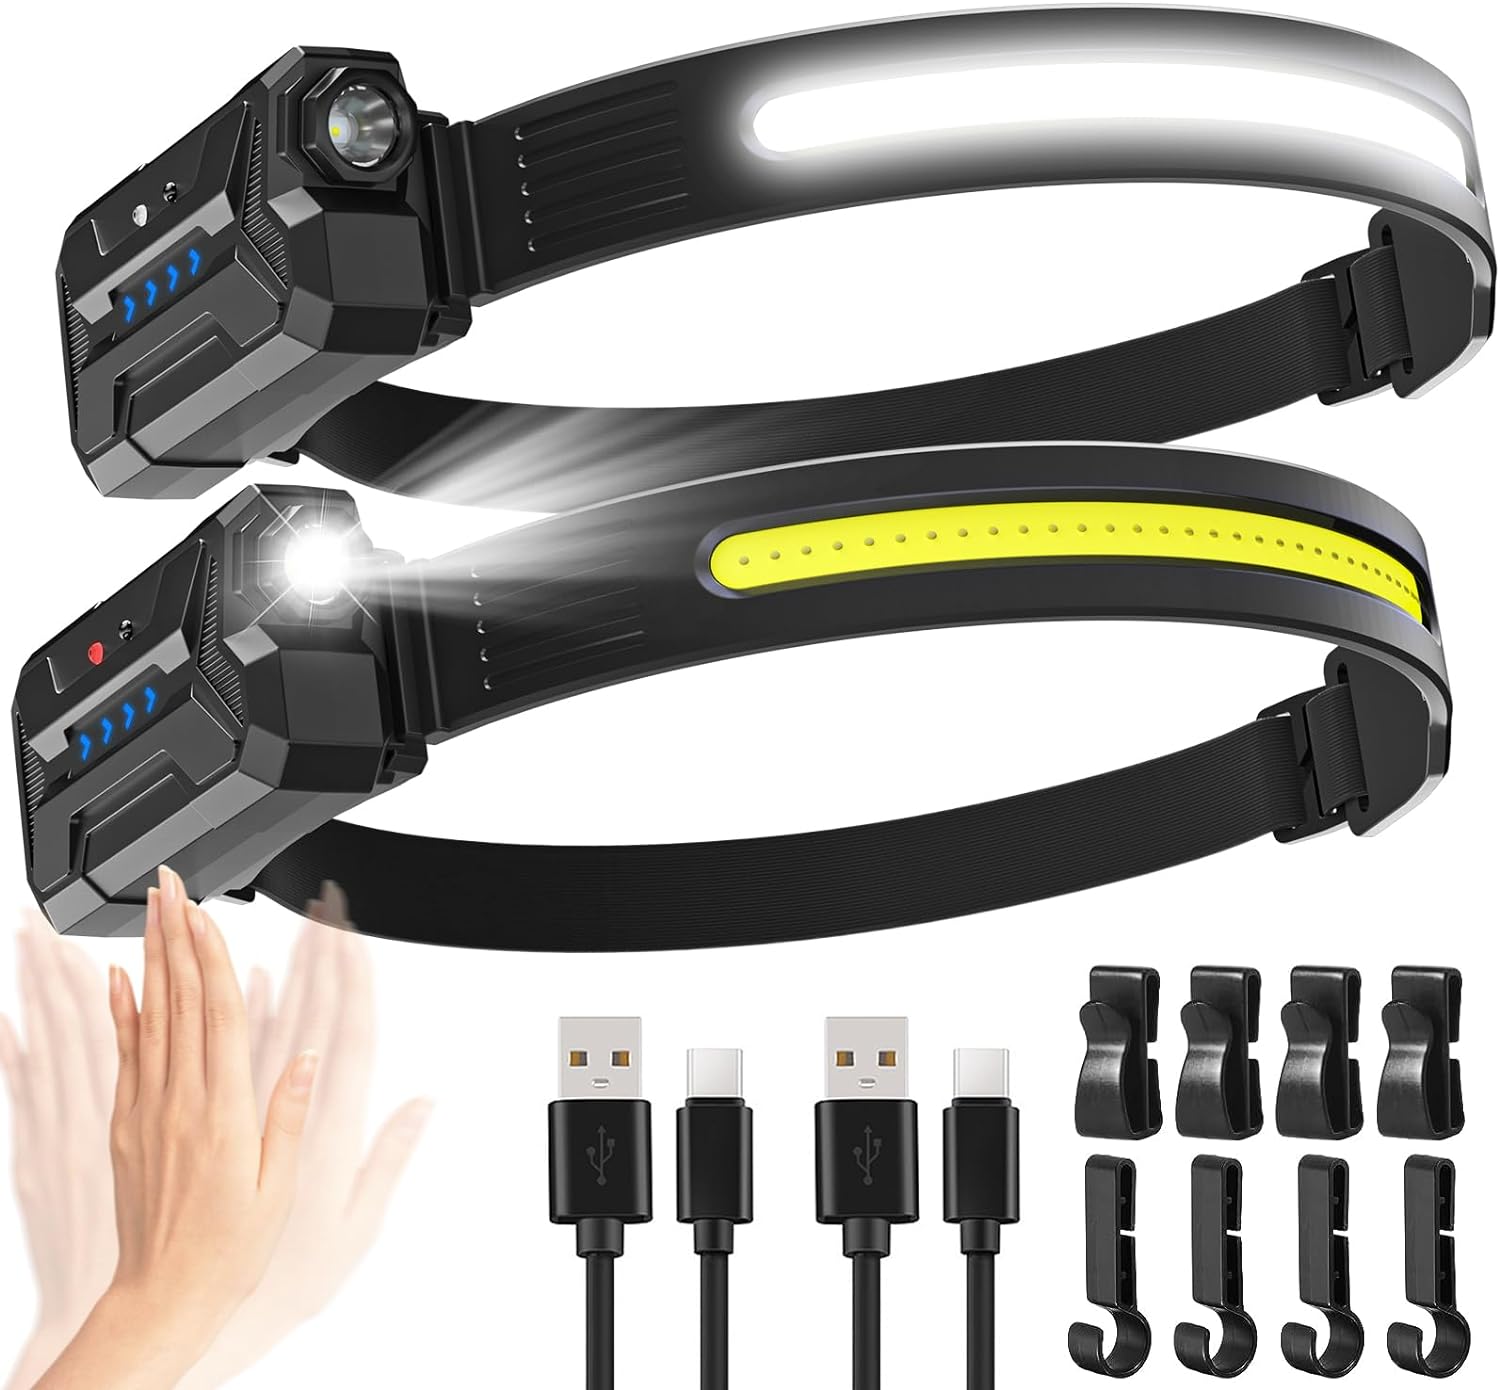 DRIVETECH 4X4 Rechargeable Dual Output LED Headlamp with Motion